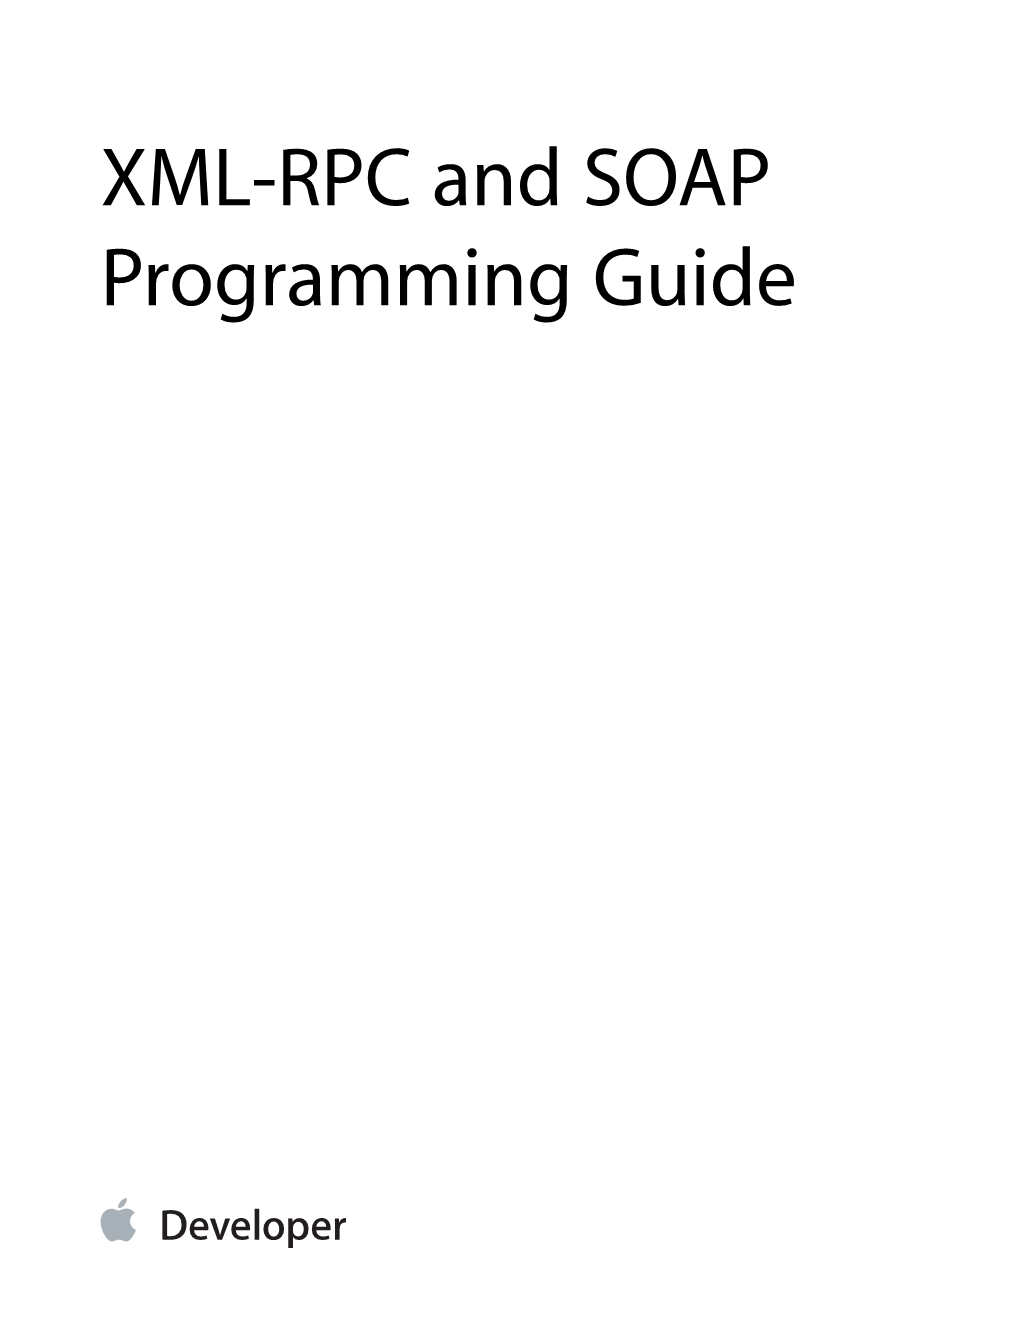 XML-RPC and SOAP Programming Guide Contents